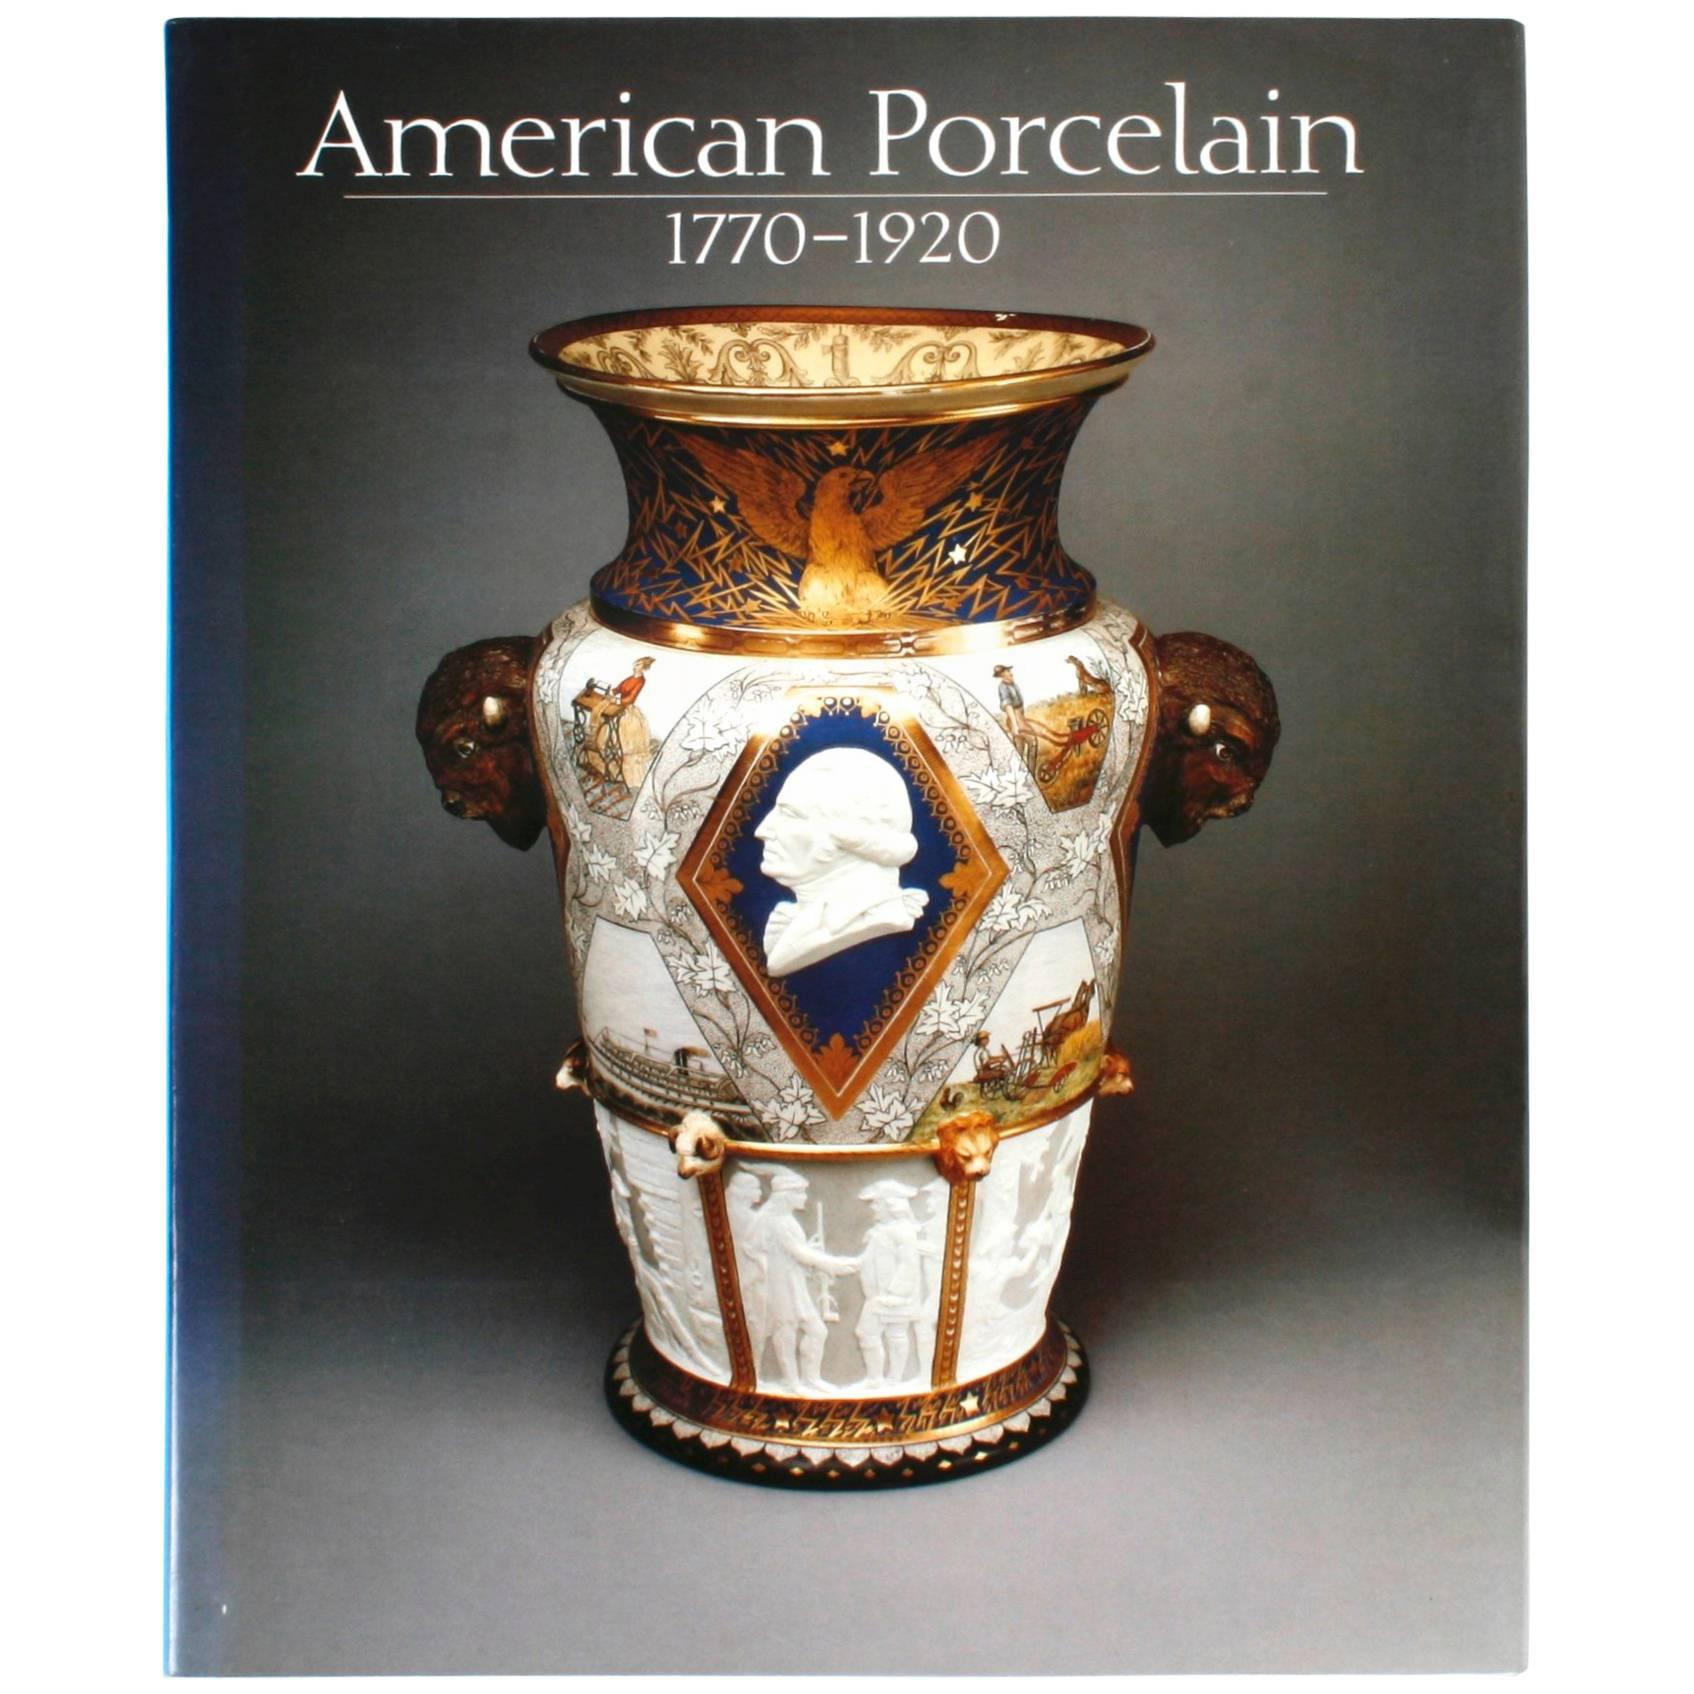 American Porcelain, 1770-1920, First Edition